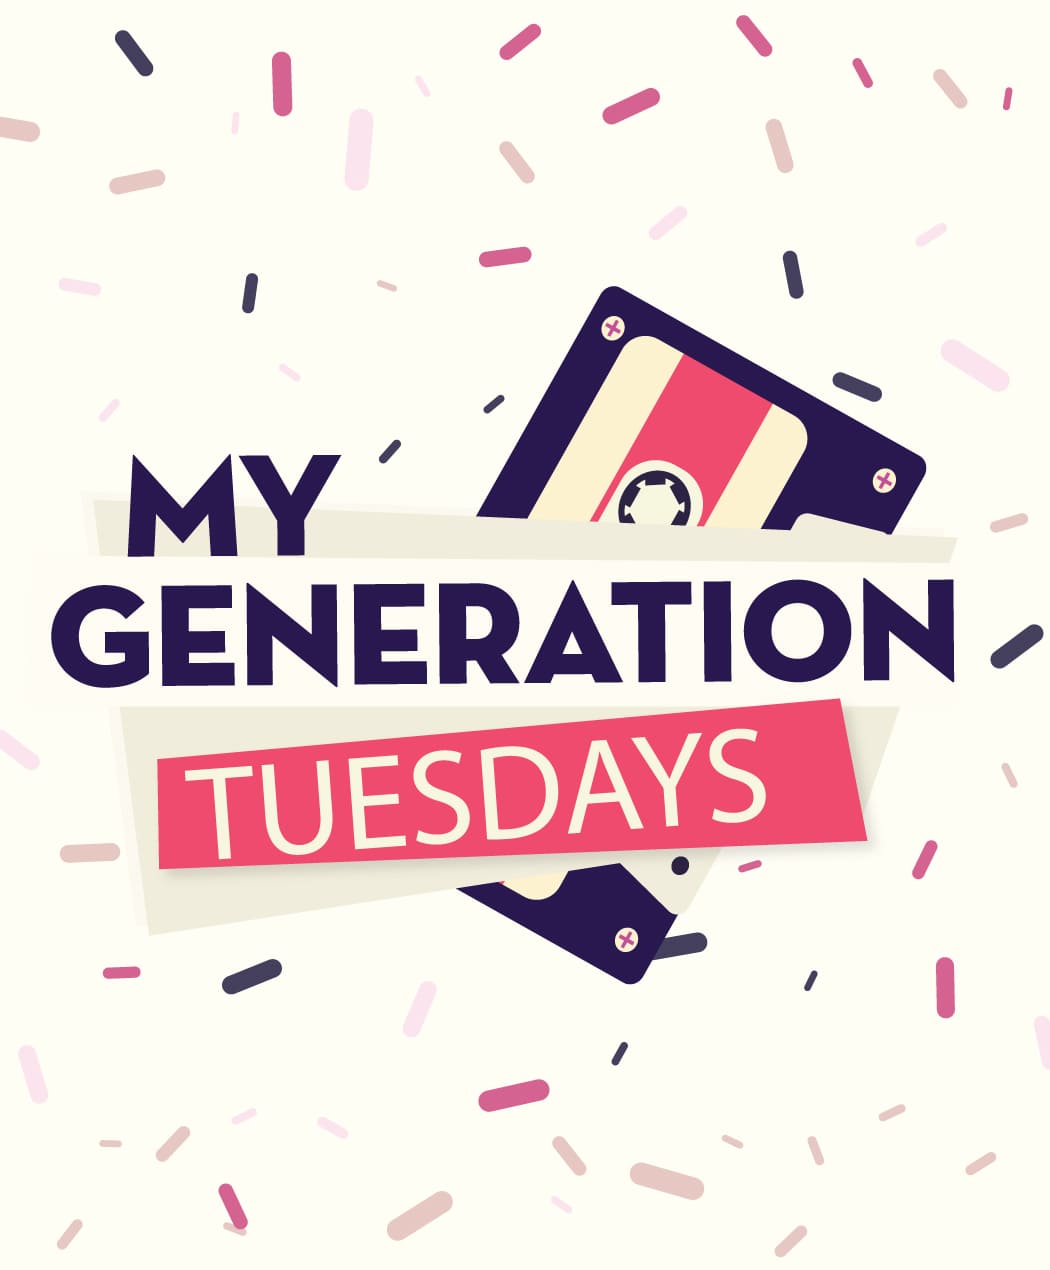 My Generation Tuesdays at Point Place Casino promotion graphic